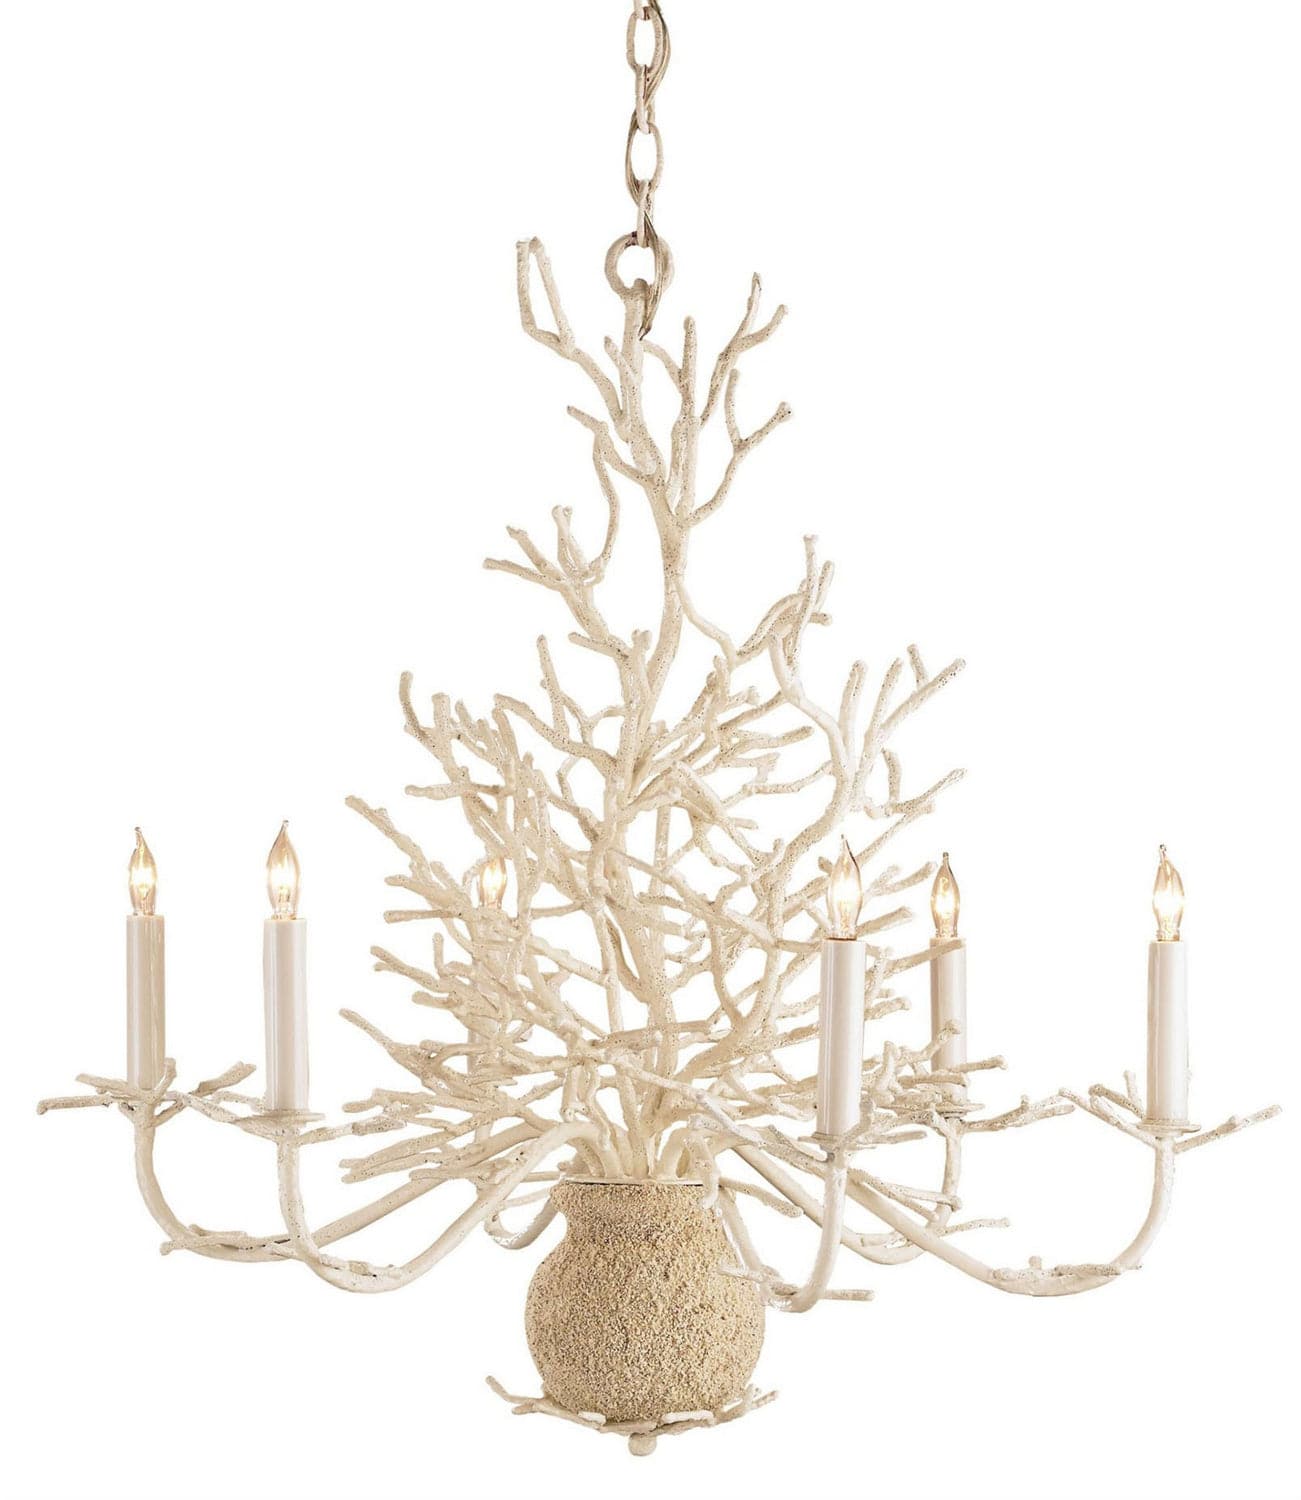 Six Light Chandelier from the Seaward collection in White Coral/Natural Sand finish